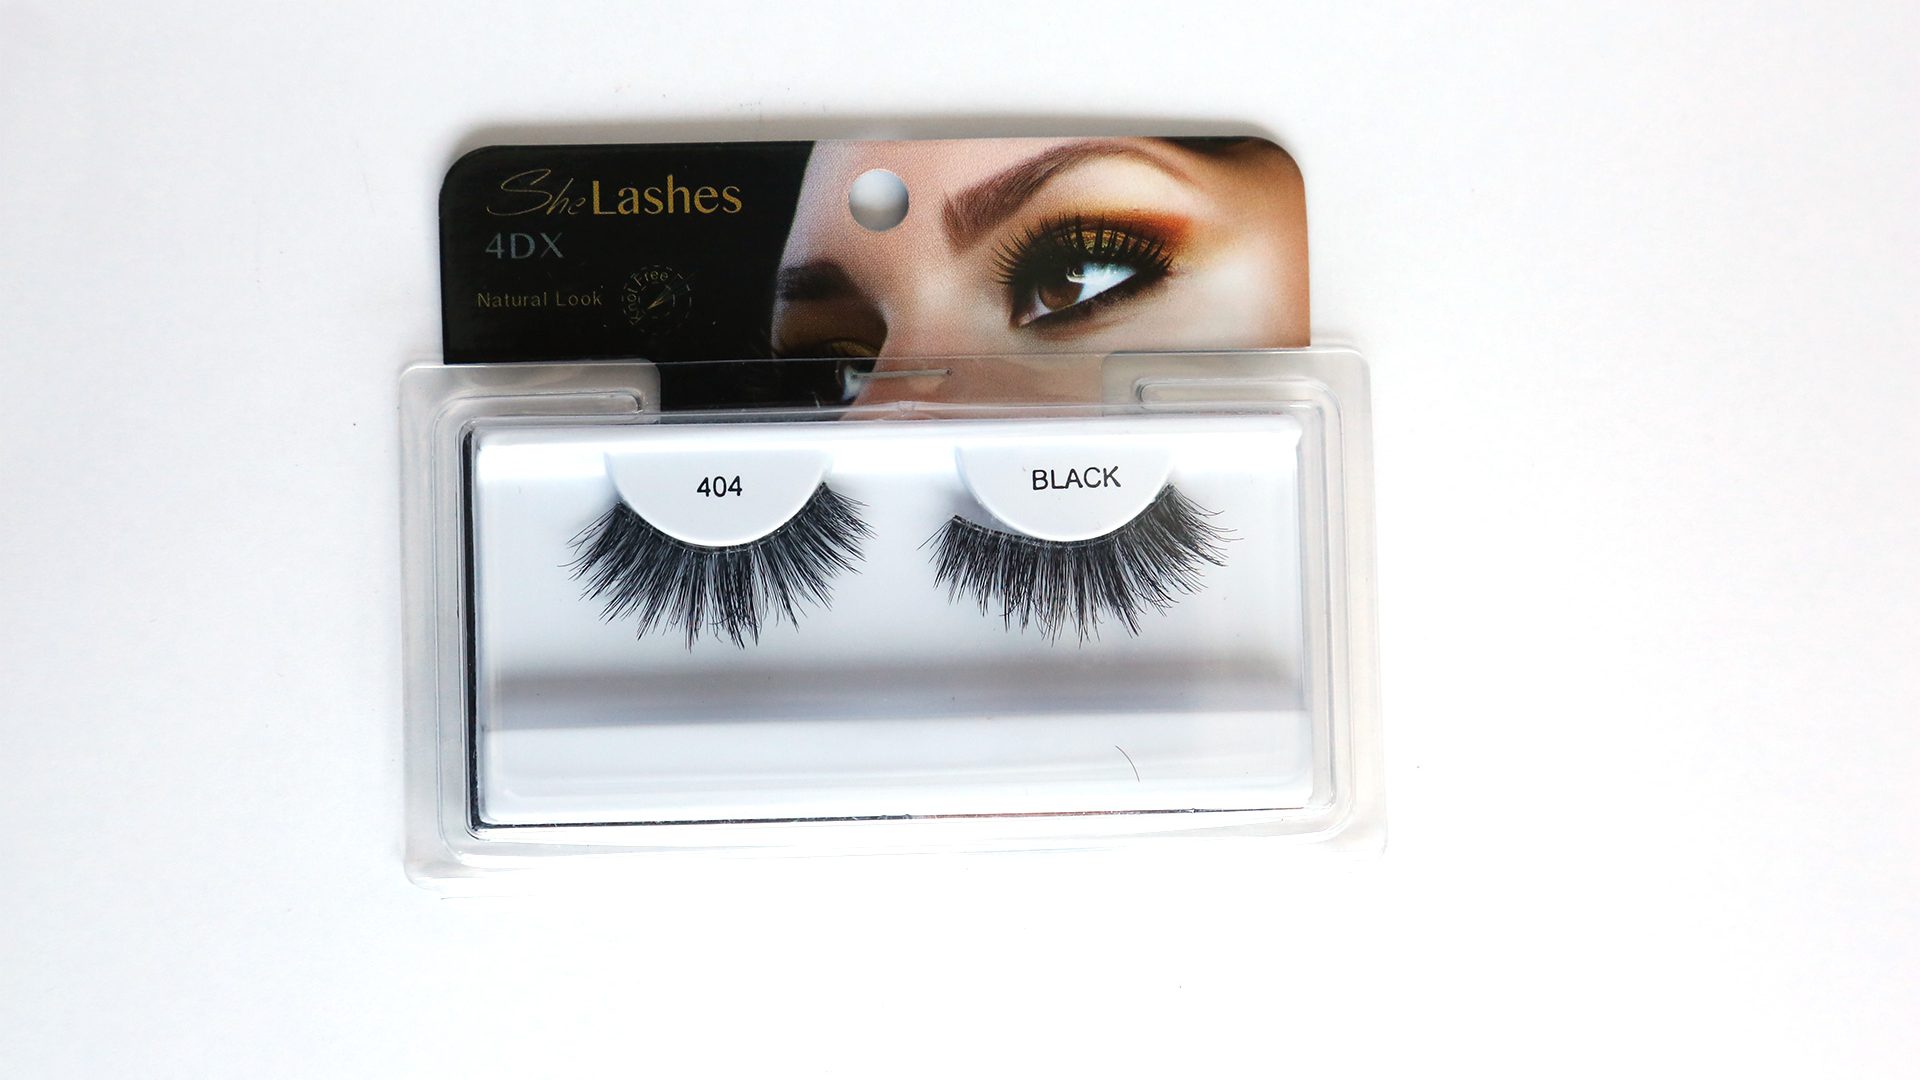 She Lashes 4DX Natural Look 404